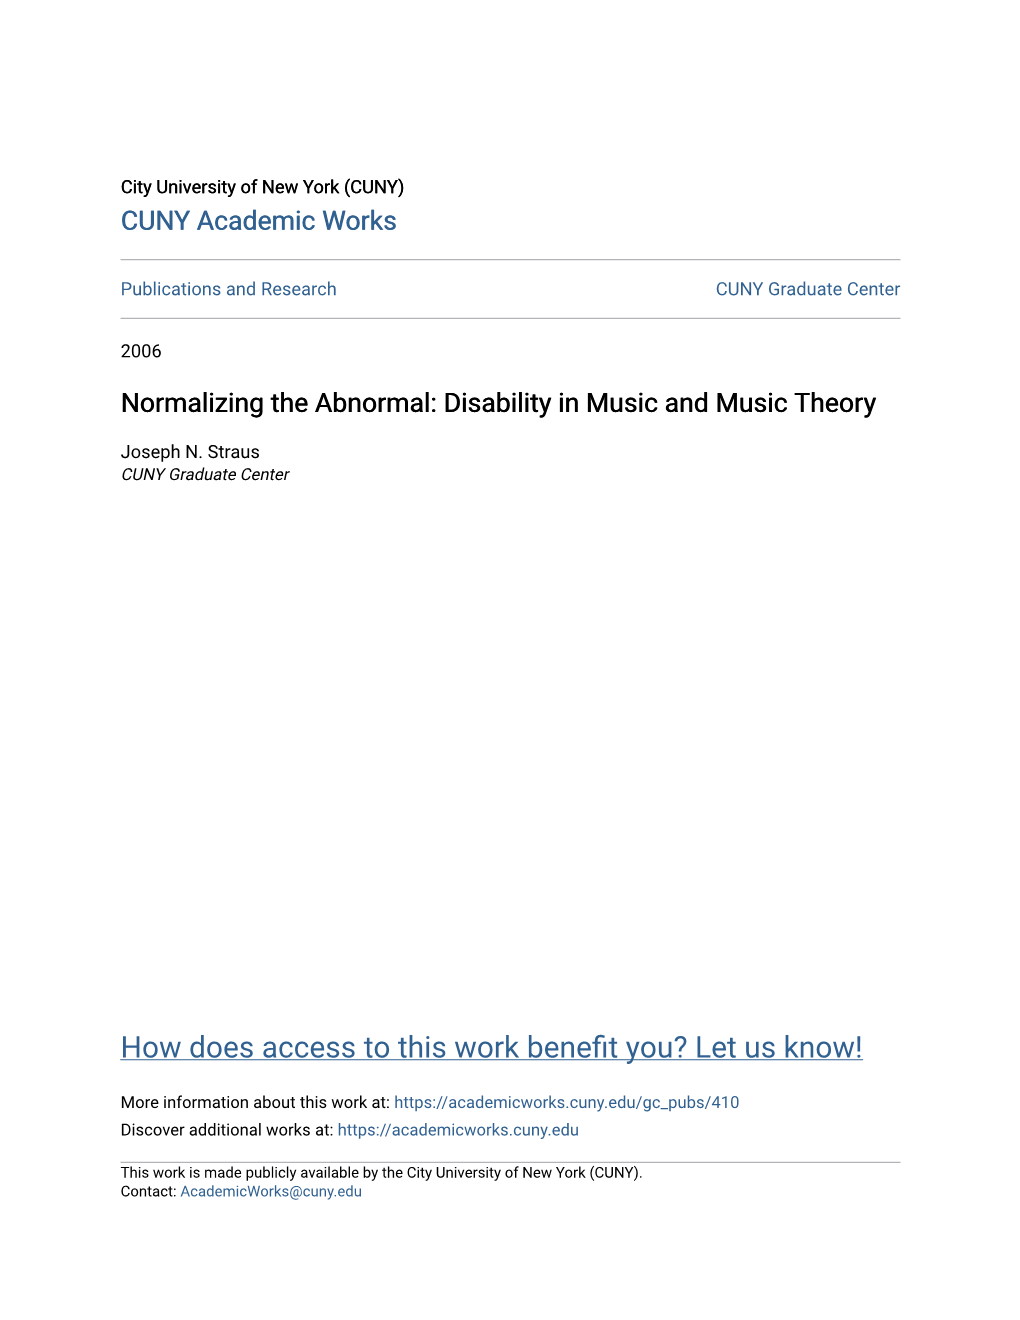 Normalizing the Abnormal: Disability in Music and Music Theory